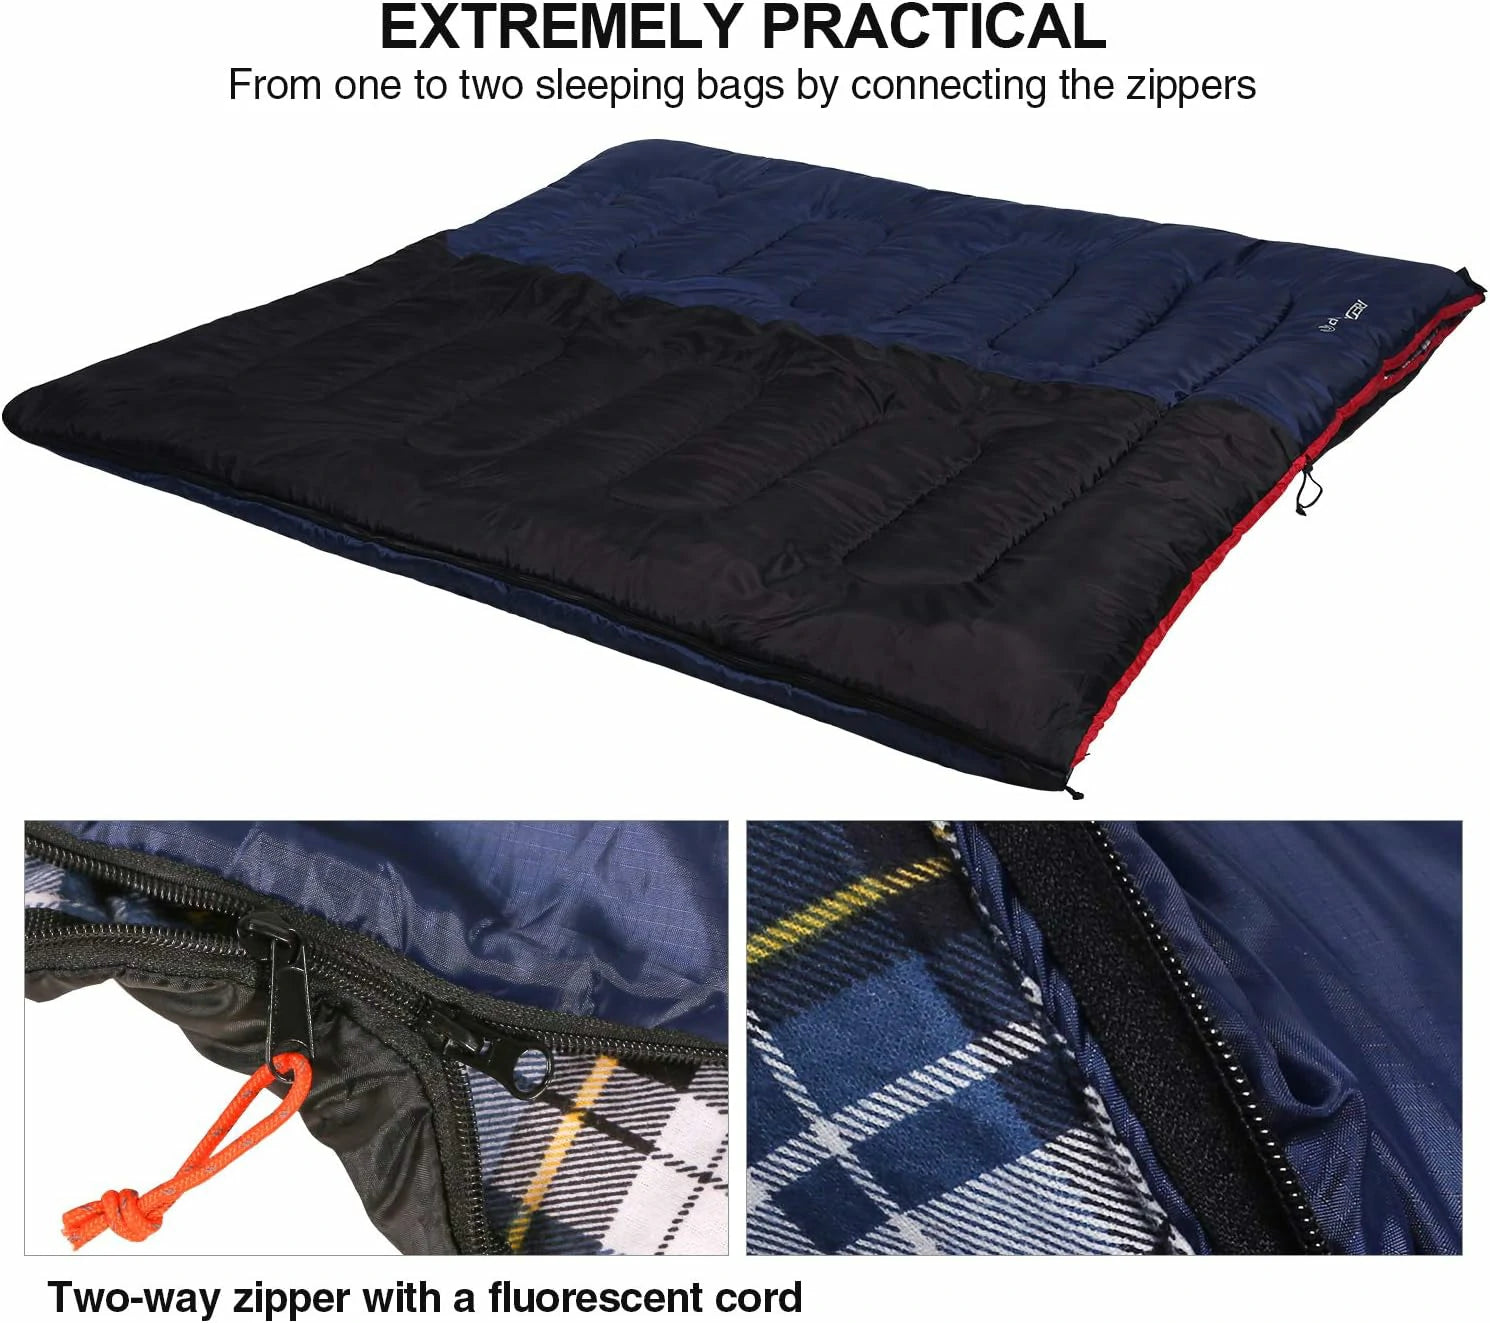 REDCAMP Cotton Flannel Sleeping Bag for Camping Backpacking